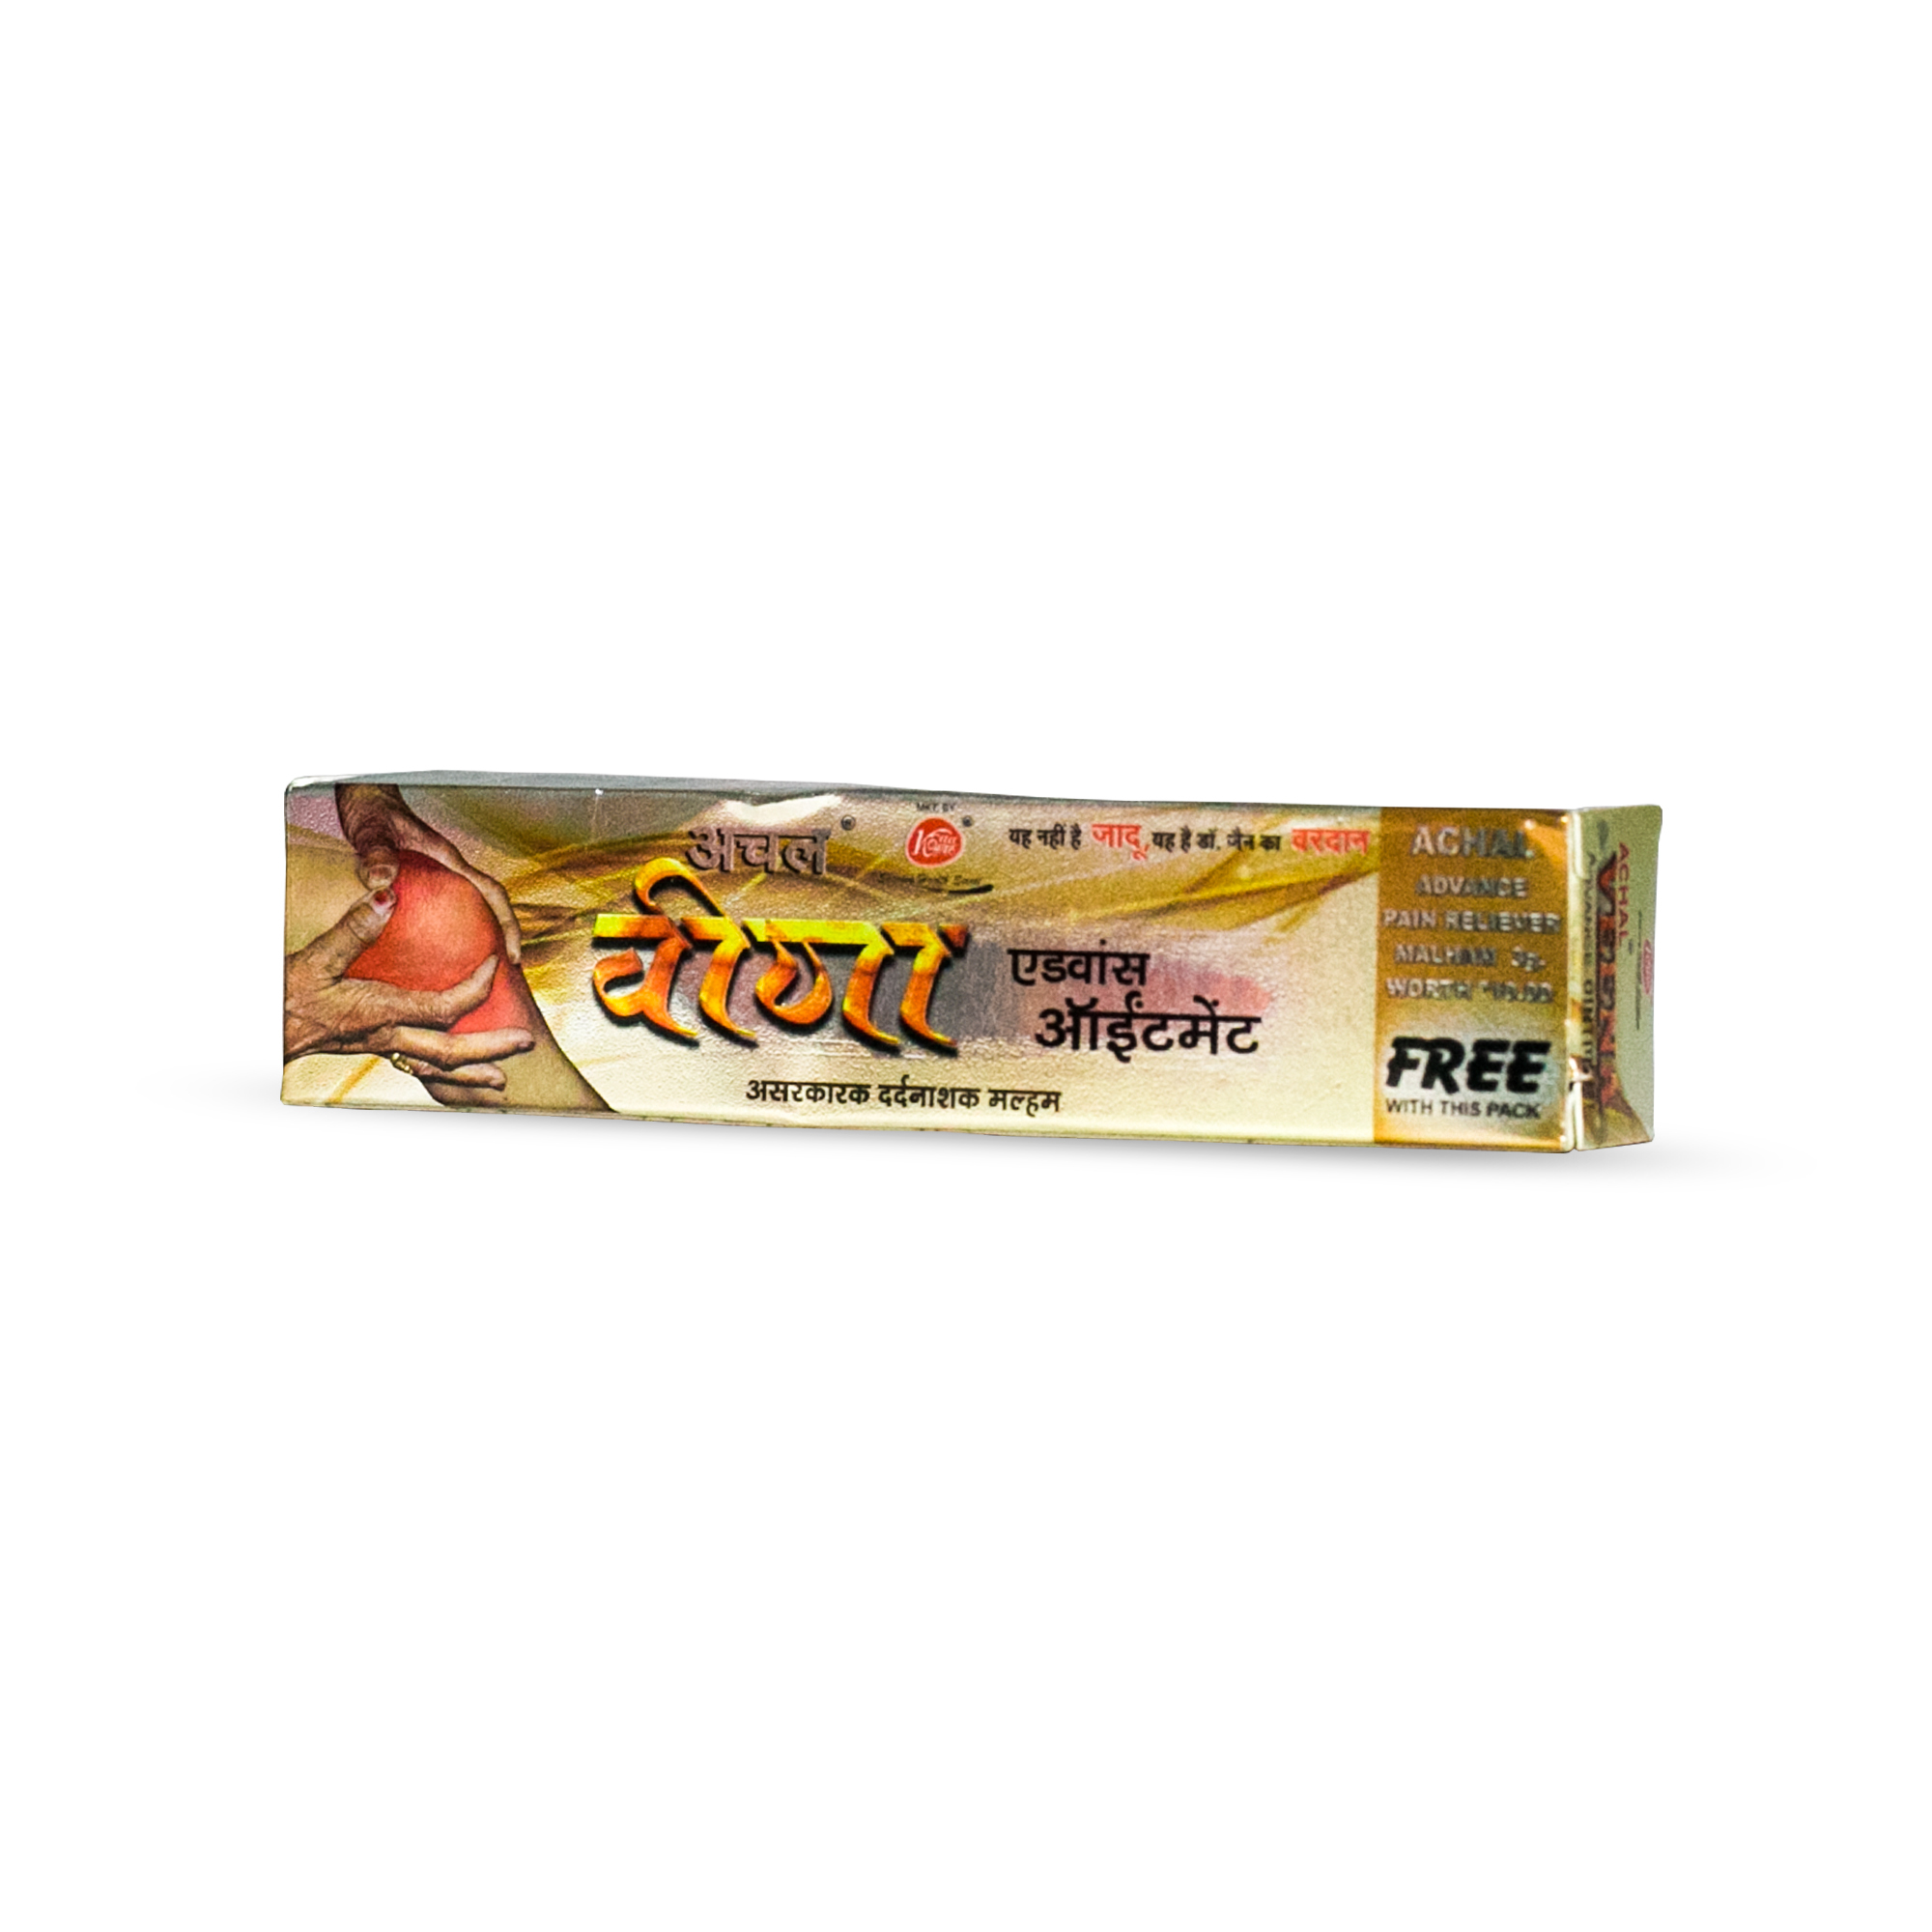 Achal Veena Advance Pain Relief Ointment